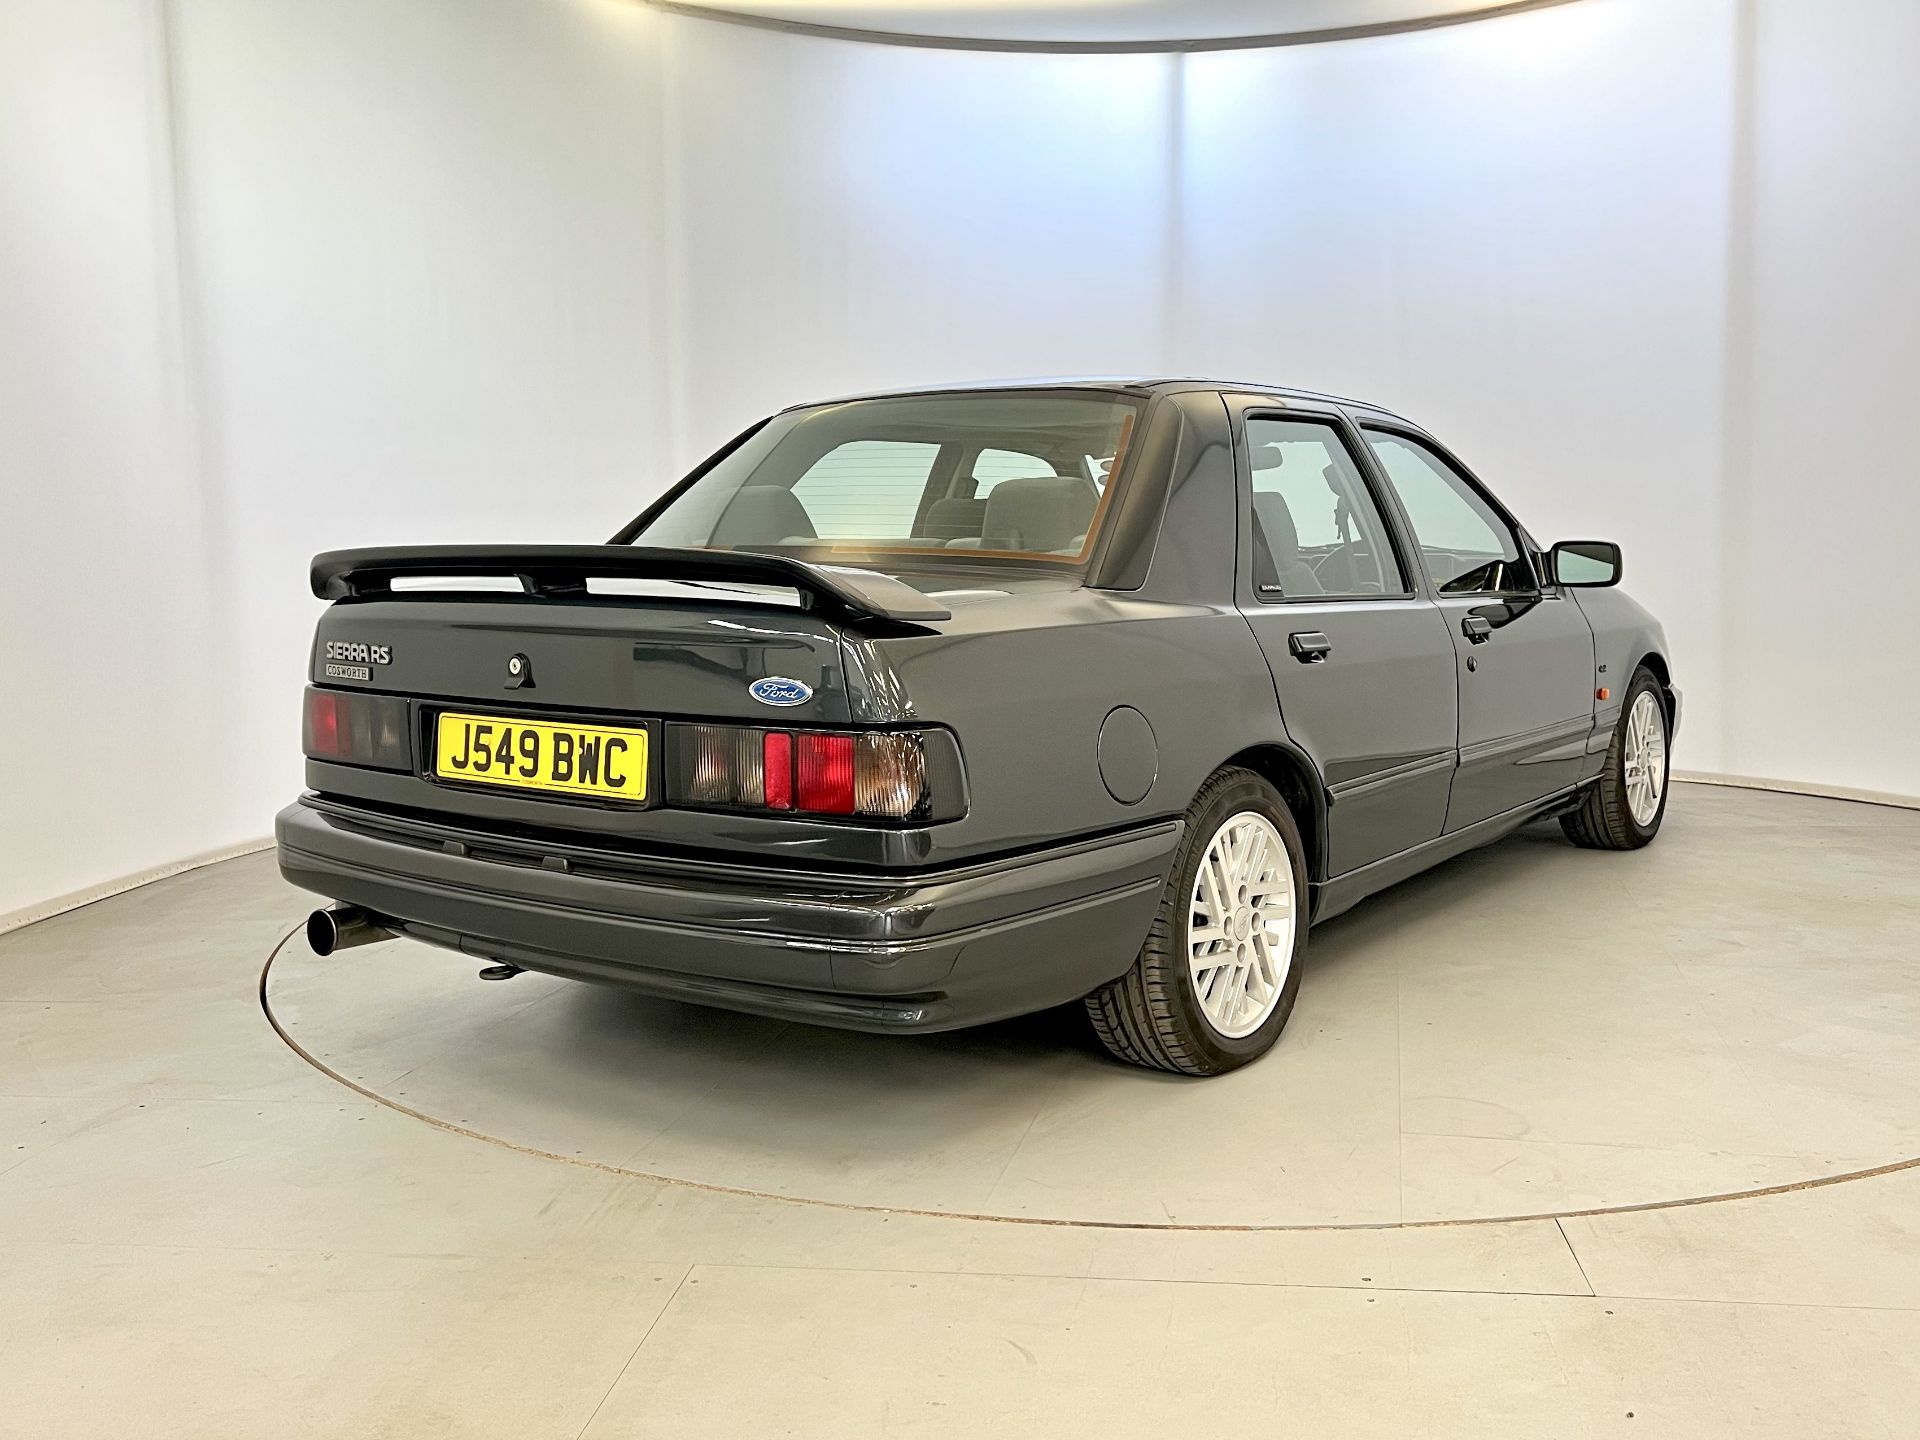 Ford Sierra Sapphire Cosworth - Image 9 of 37